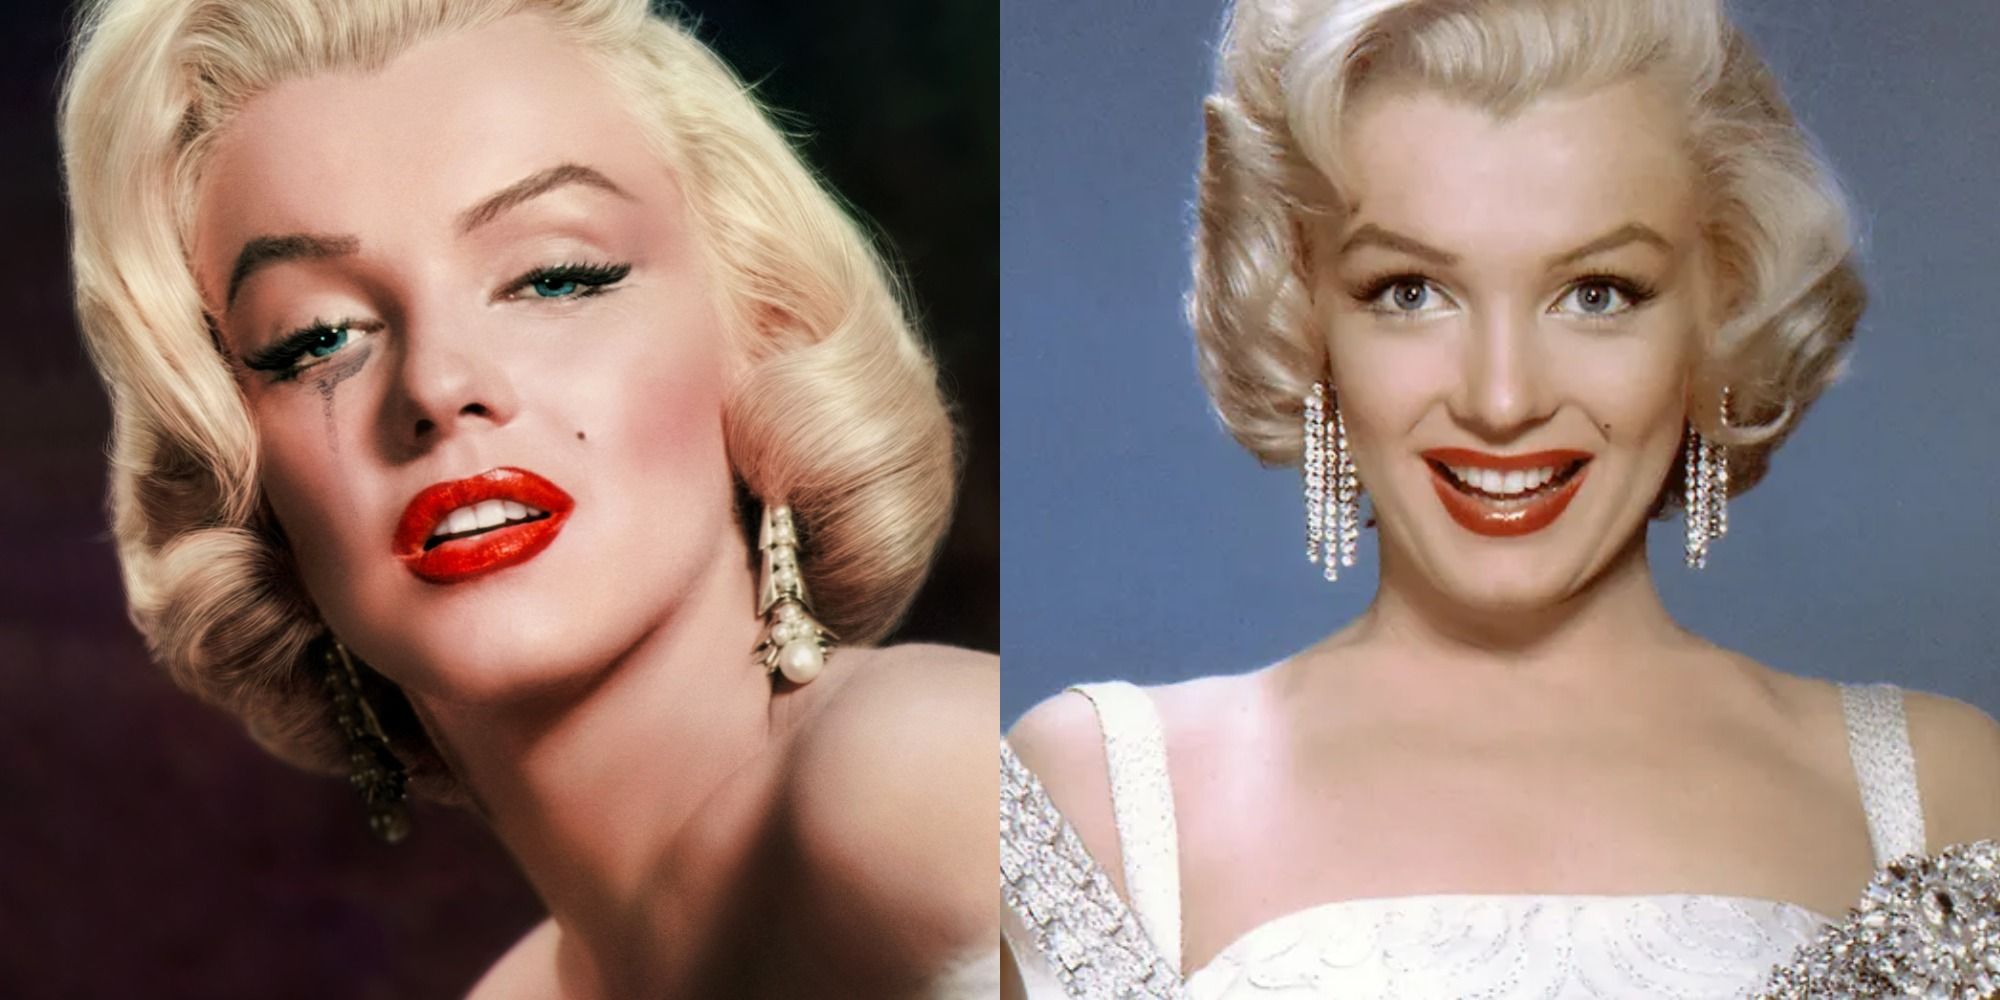 Split image showing the poster for The Mystery of Marilyn Monroe and Marilyn Monroe smiling.